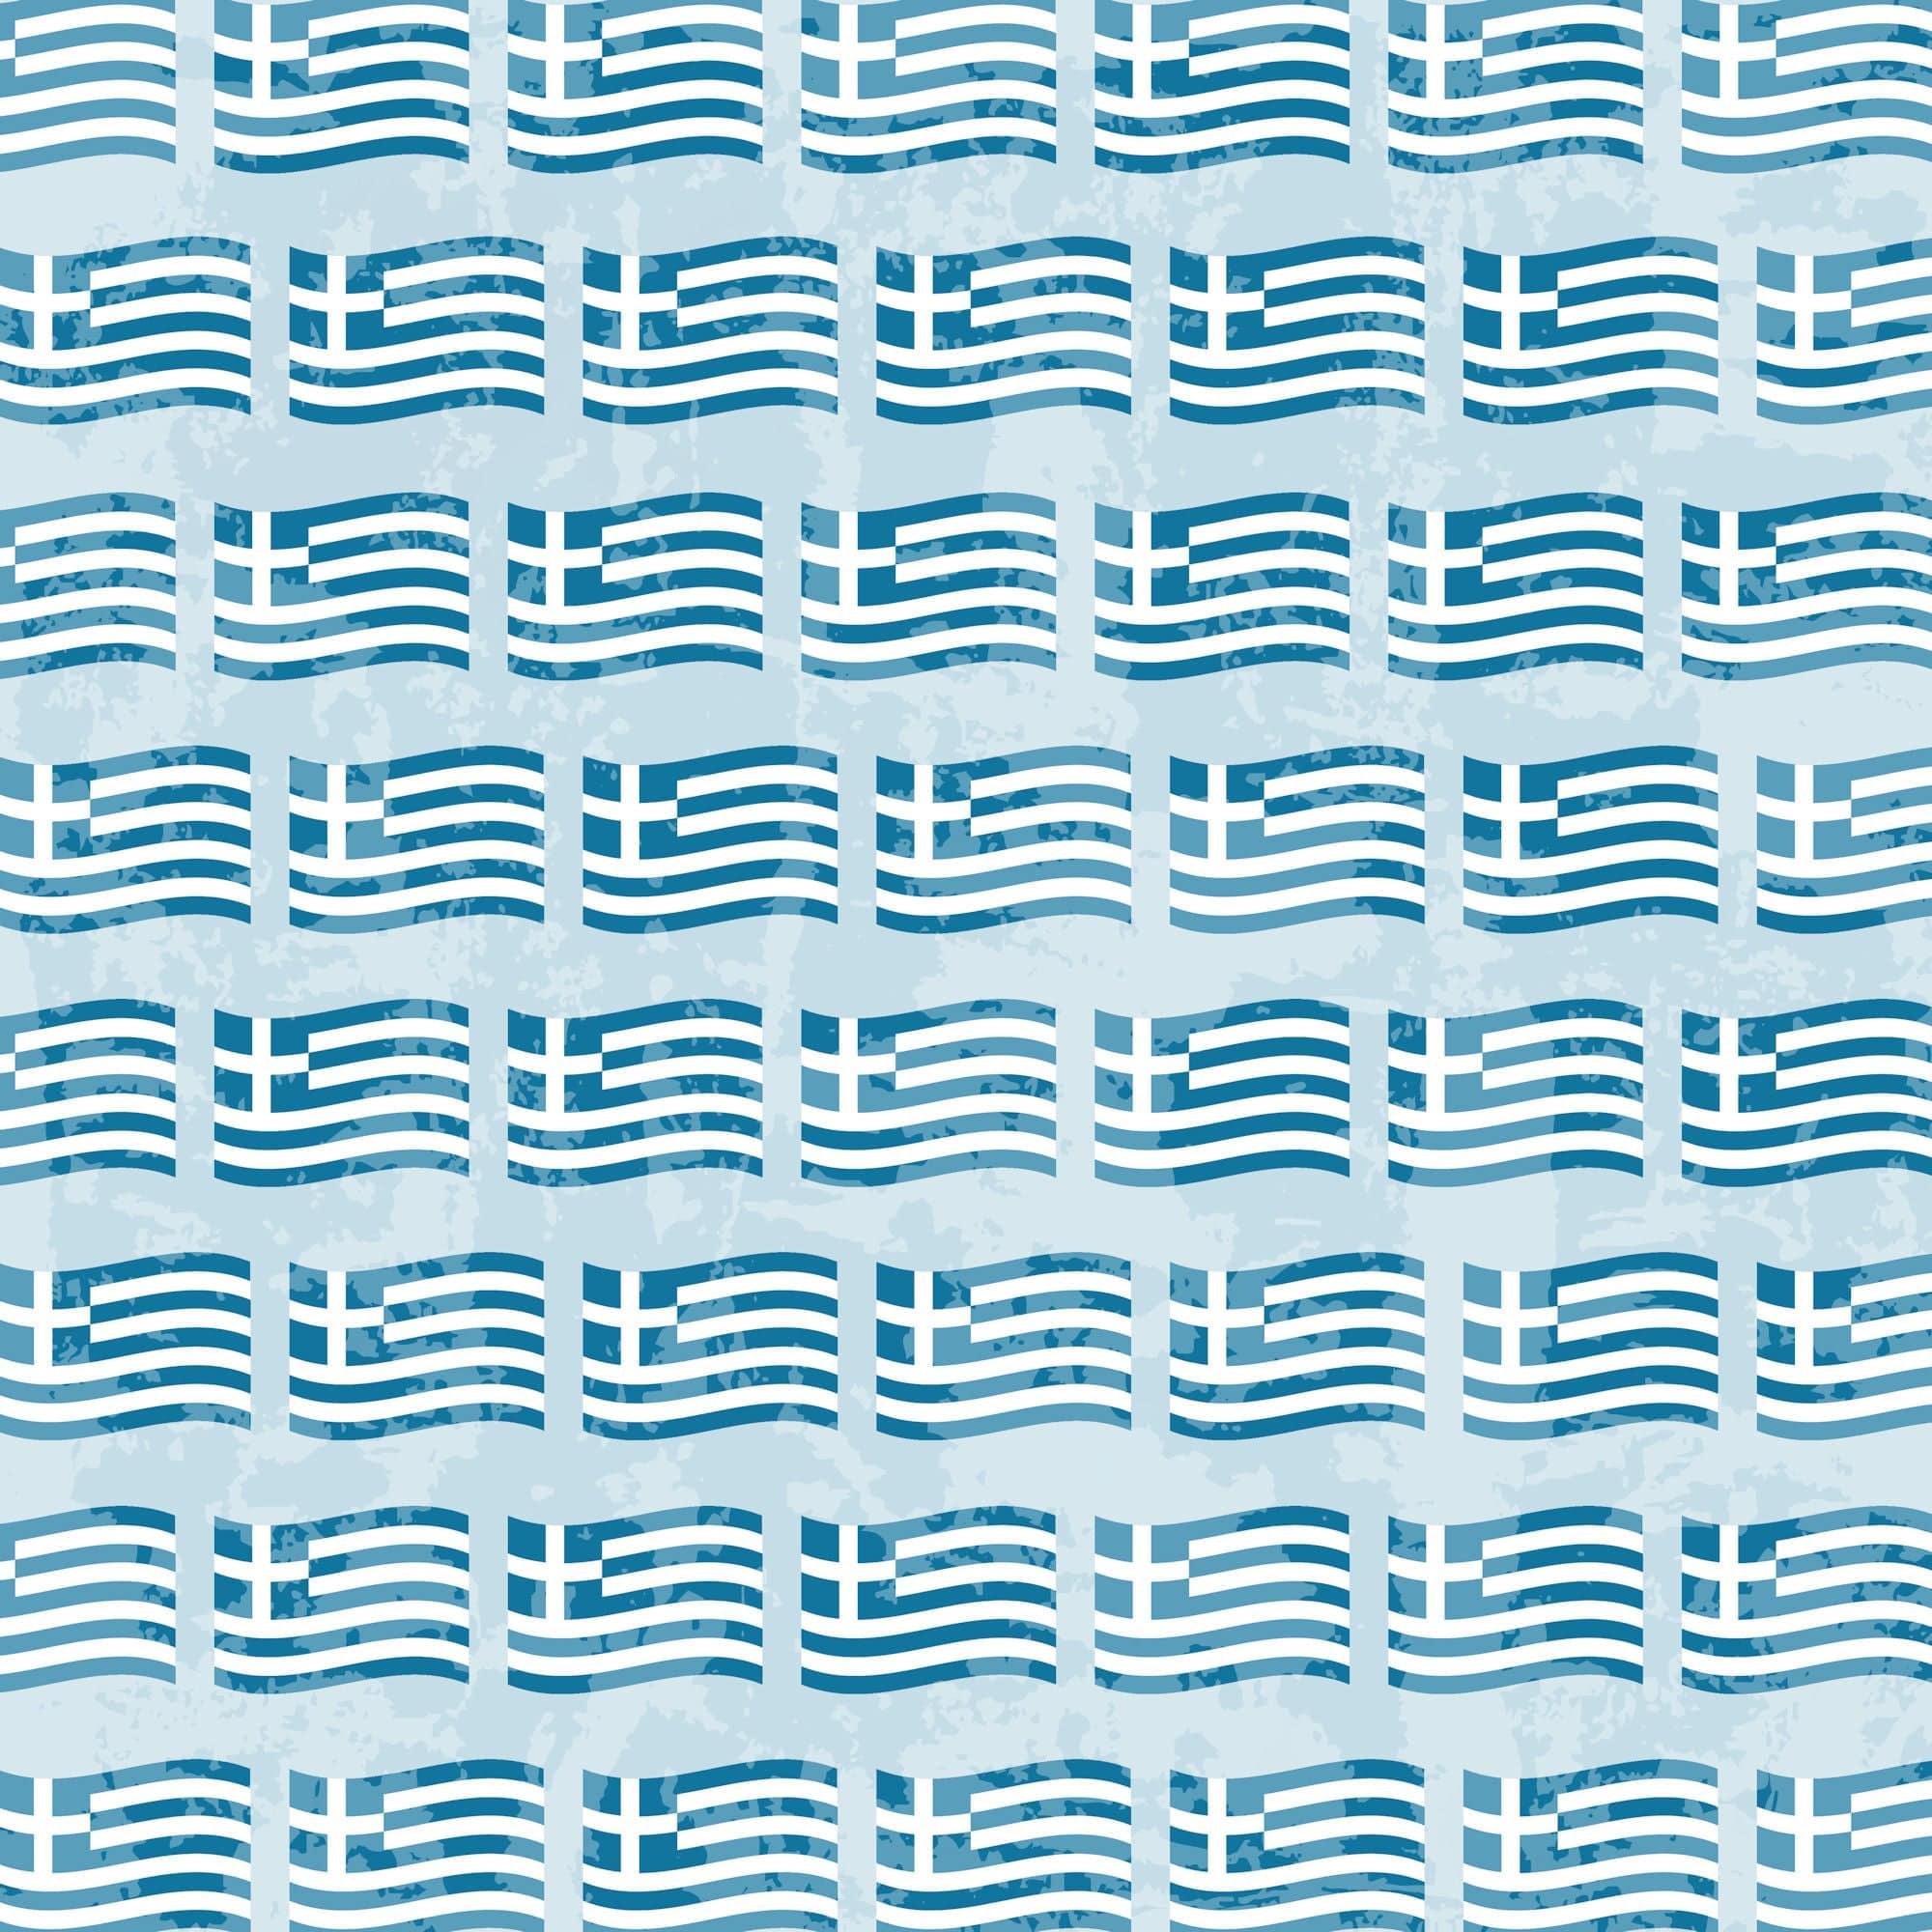 Greece Collection Greece 12 x 12 Double-Sided Scrapbook Paper by SSC Designs - Scrapbook Supply Companies